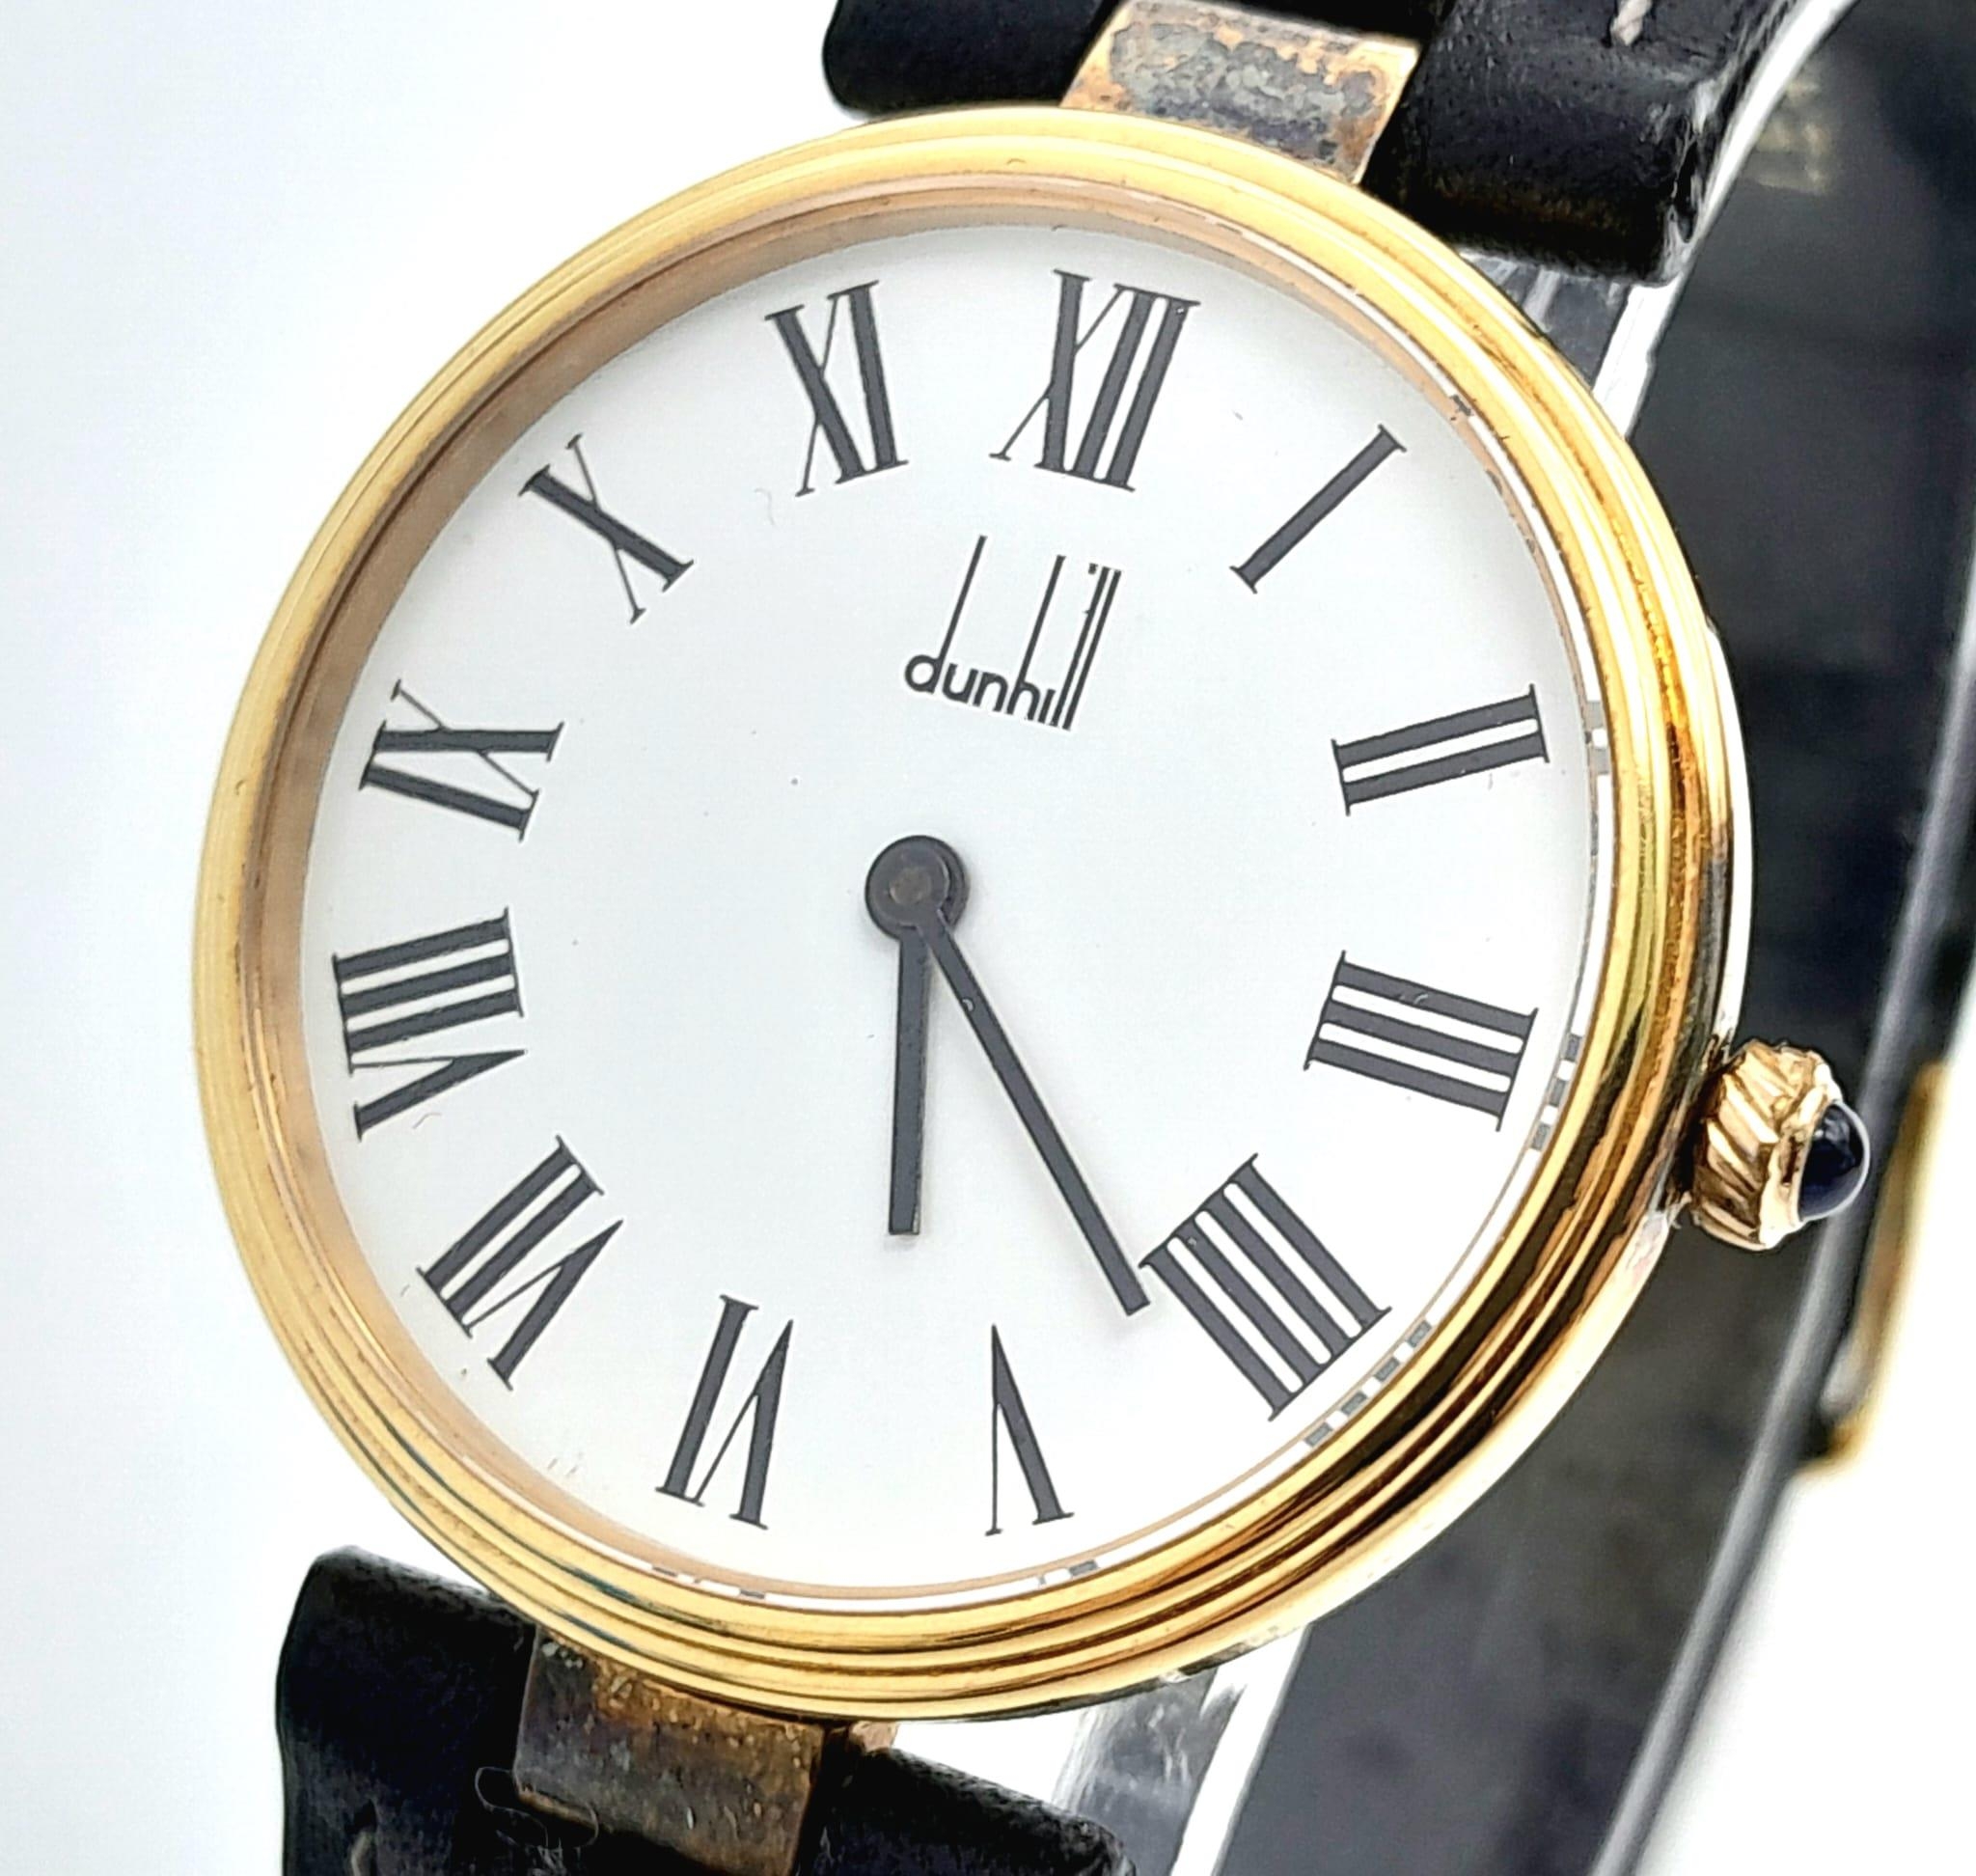 A Dunhill Sterling Silver Gilt Chronometer Watch. 34mm Case, Black Leather Strap. Full Working - Image 3 of 8